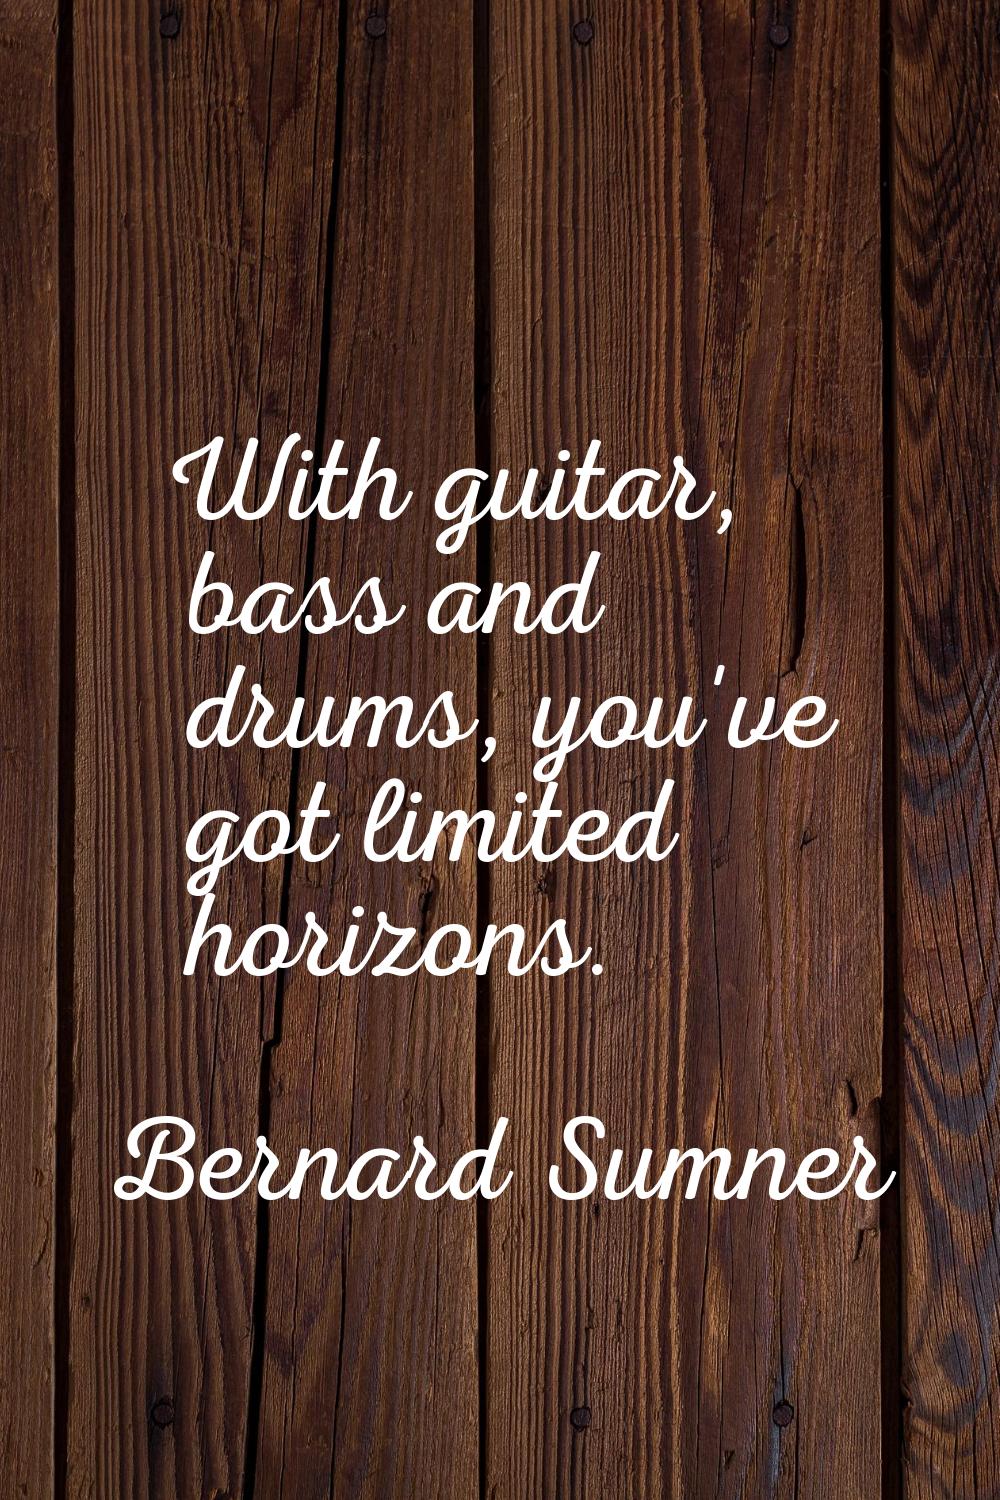 With guitar, bass and drums, you've got limited horizons.